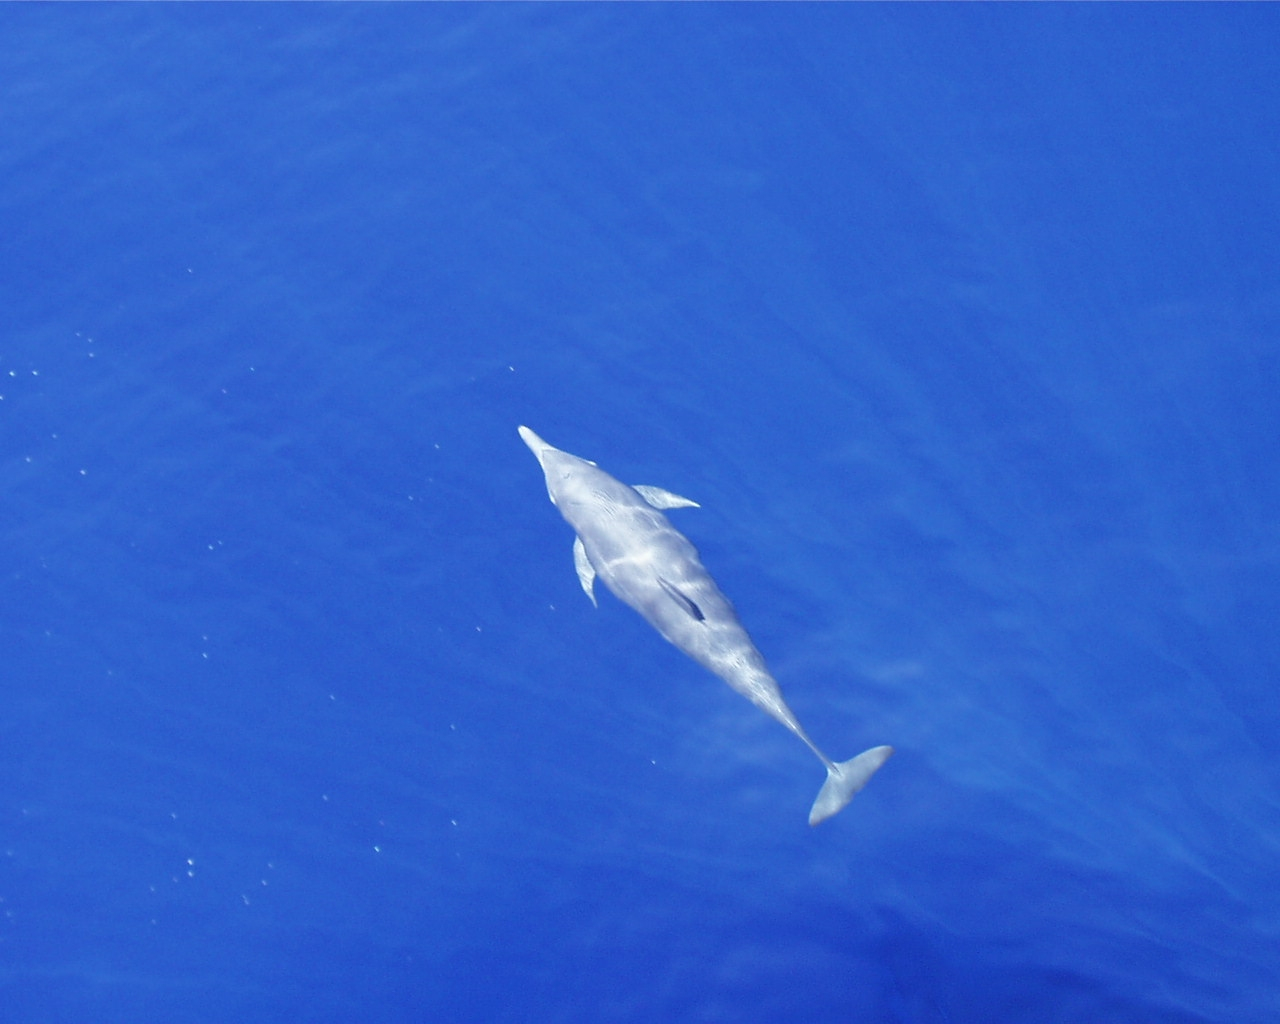 Dolphin as seen ahead of bow of ship on remarkably calm day